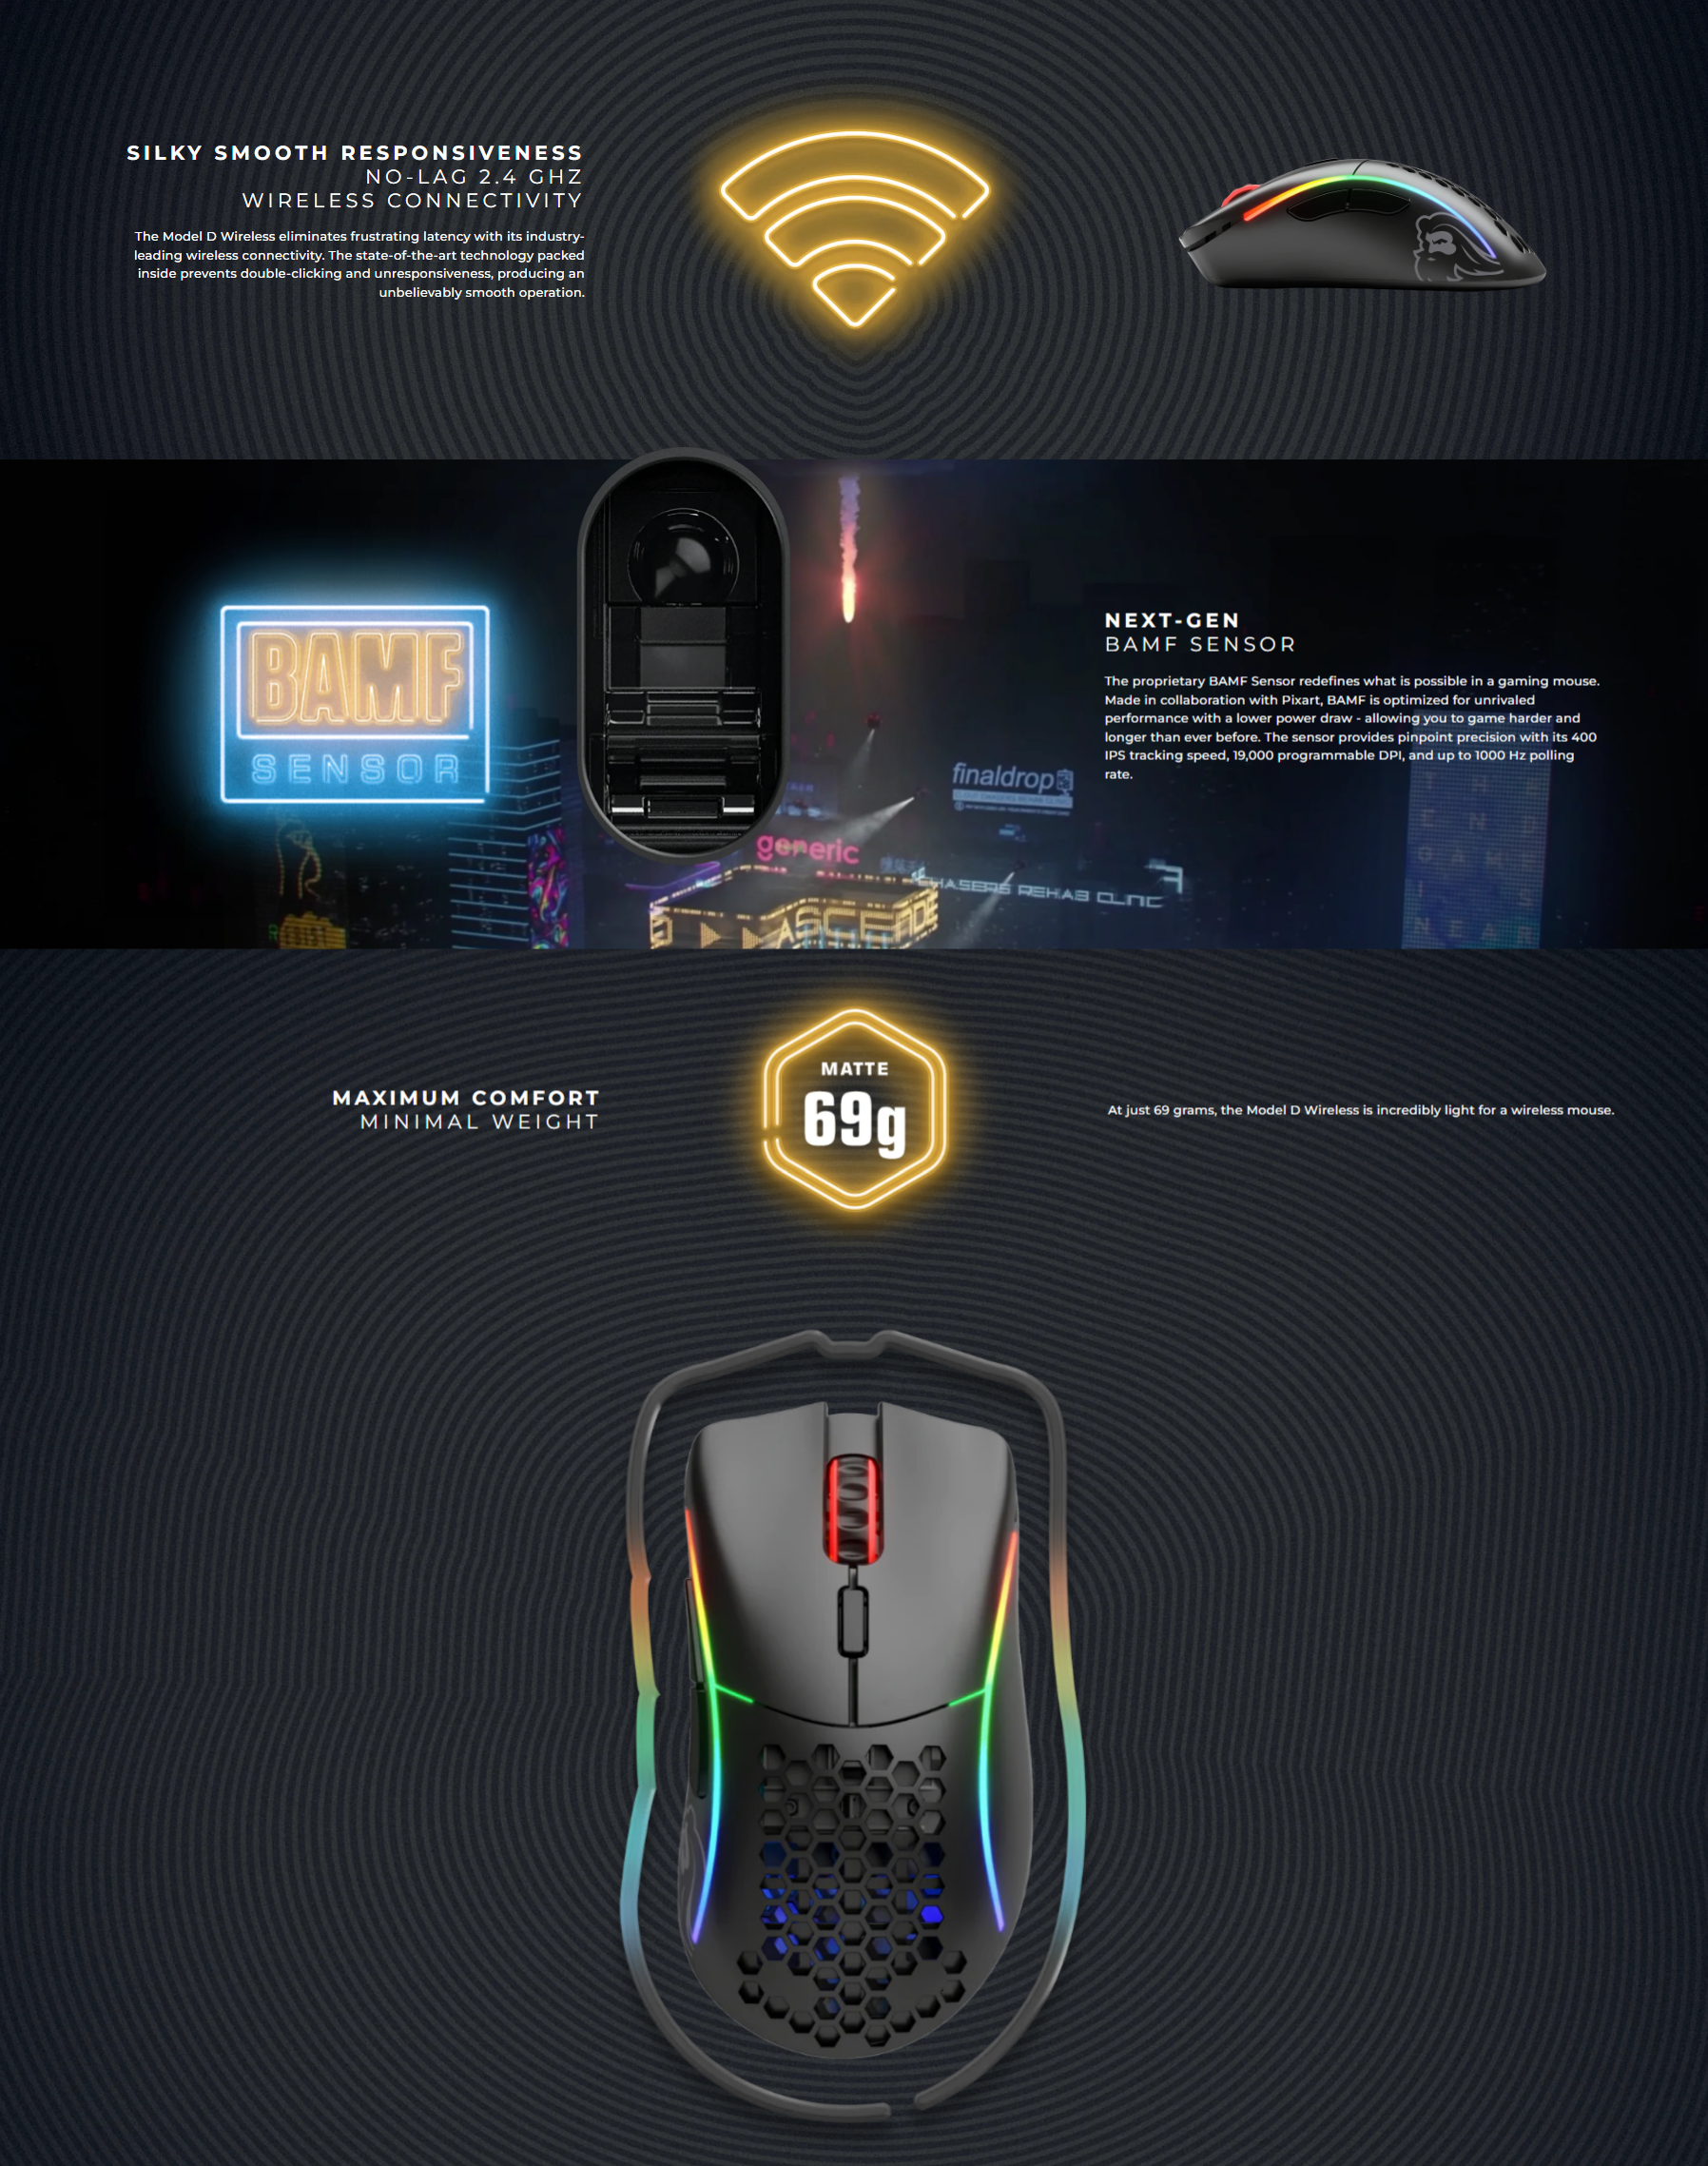 A large marketing image providing additional information about the product Glorious Model D Ergonomic Wireless Gaming Mouse - Matte Black - Additional alt info not provided